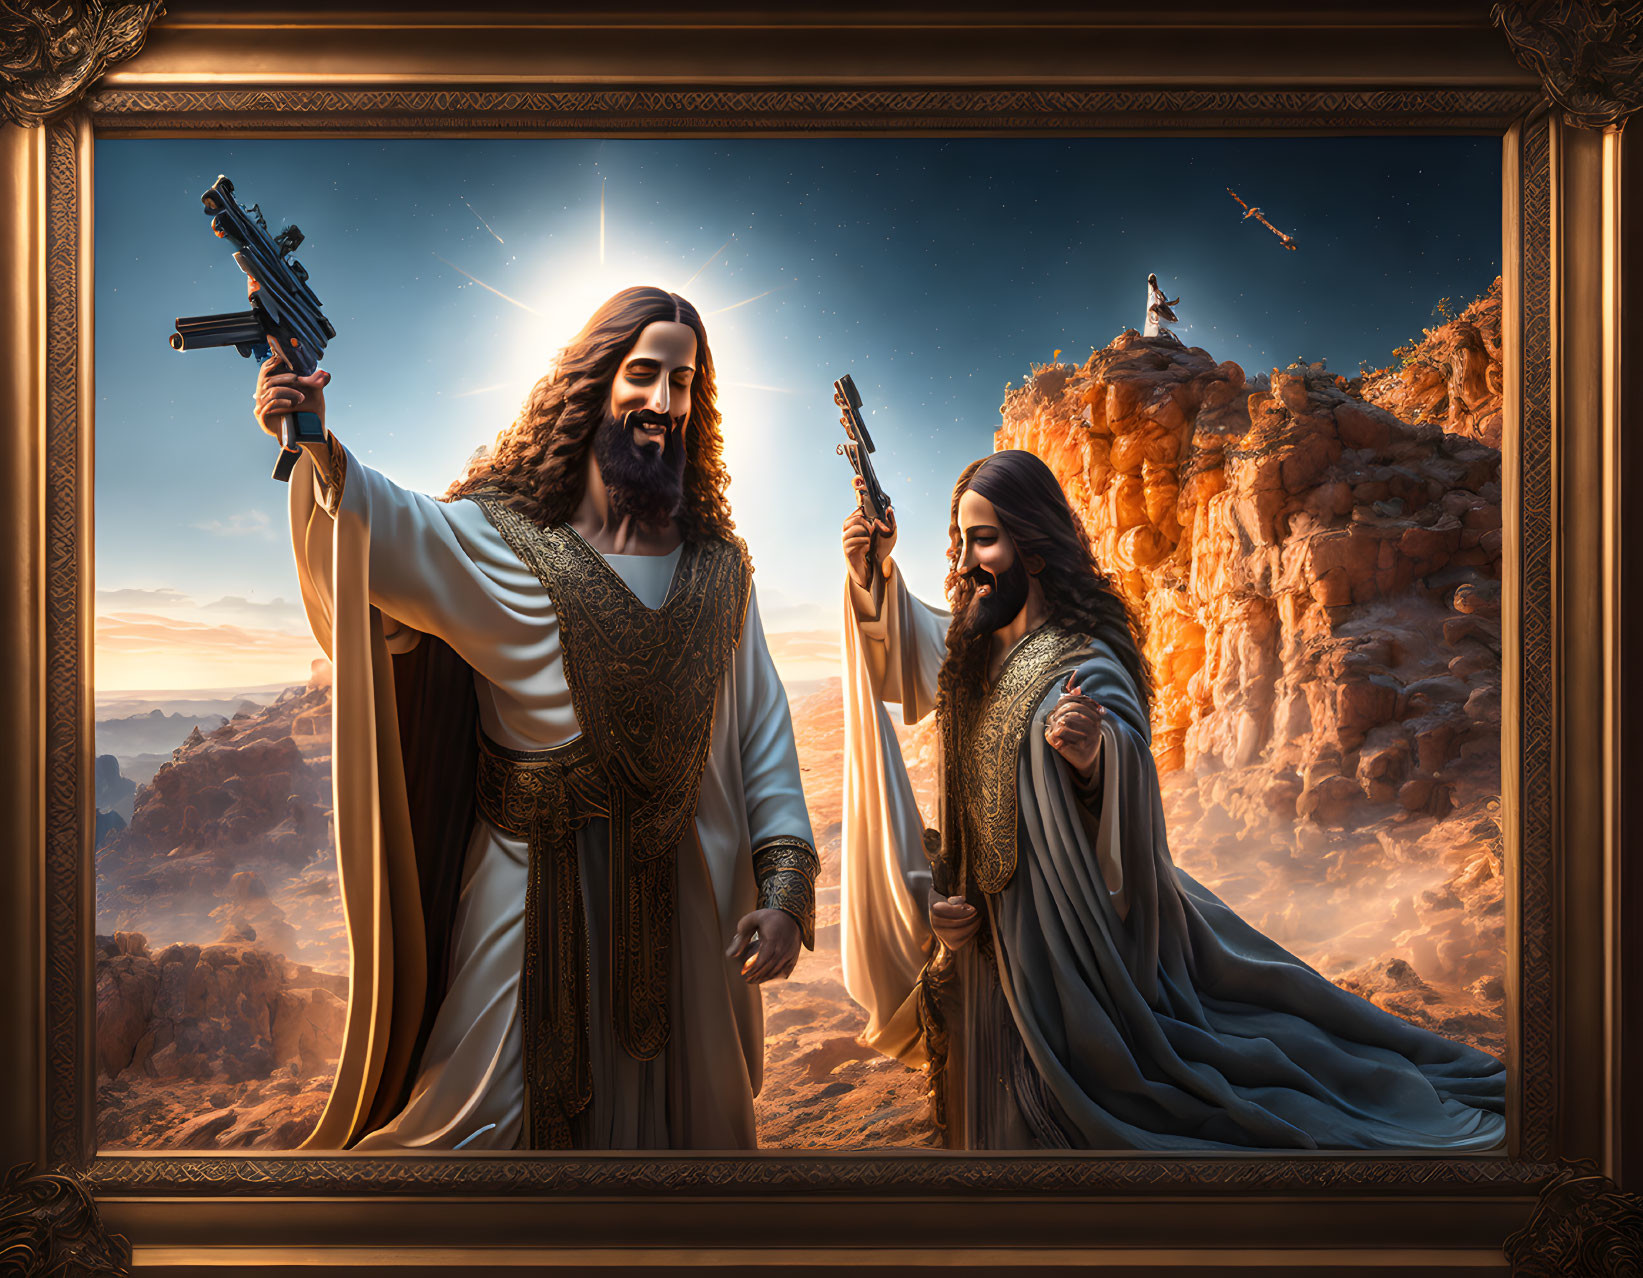 Historical and religious figures with guns in a desert painting